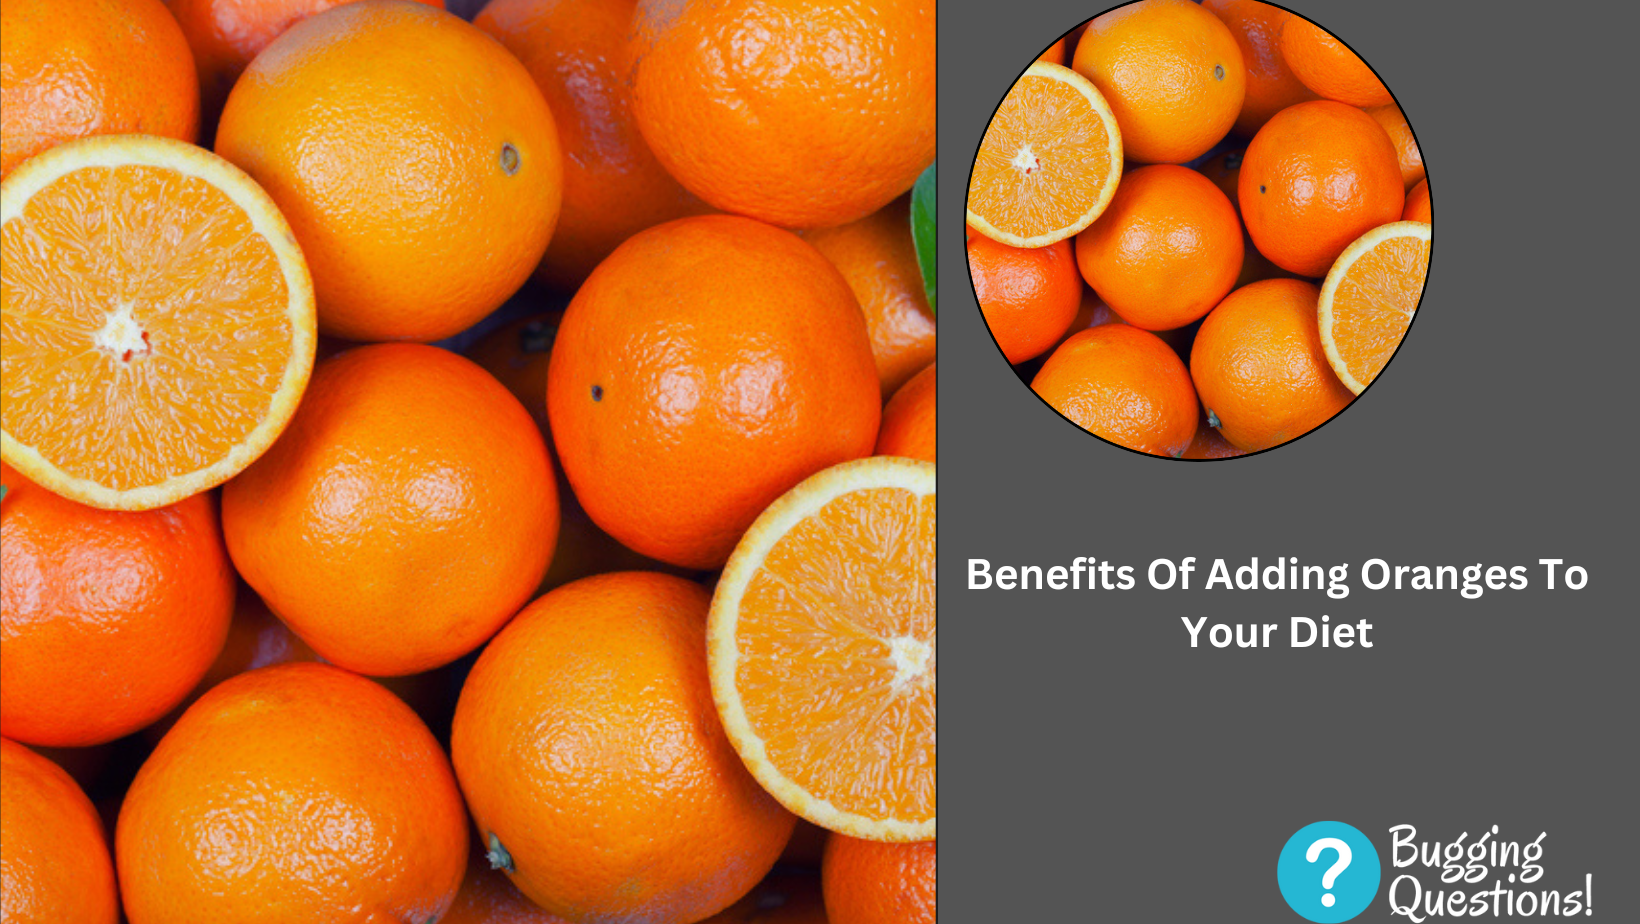 Benefits Of Adding Oranges To Your Diet